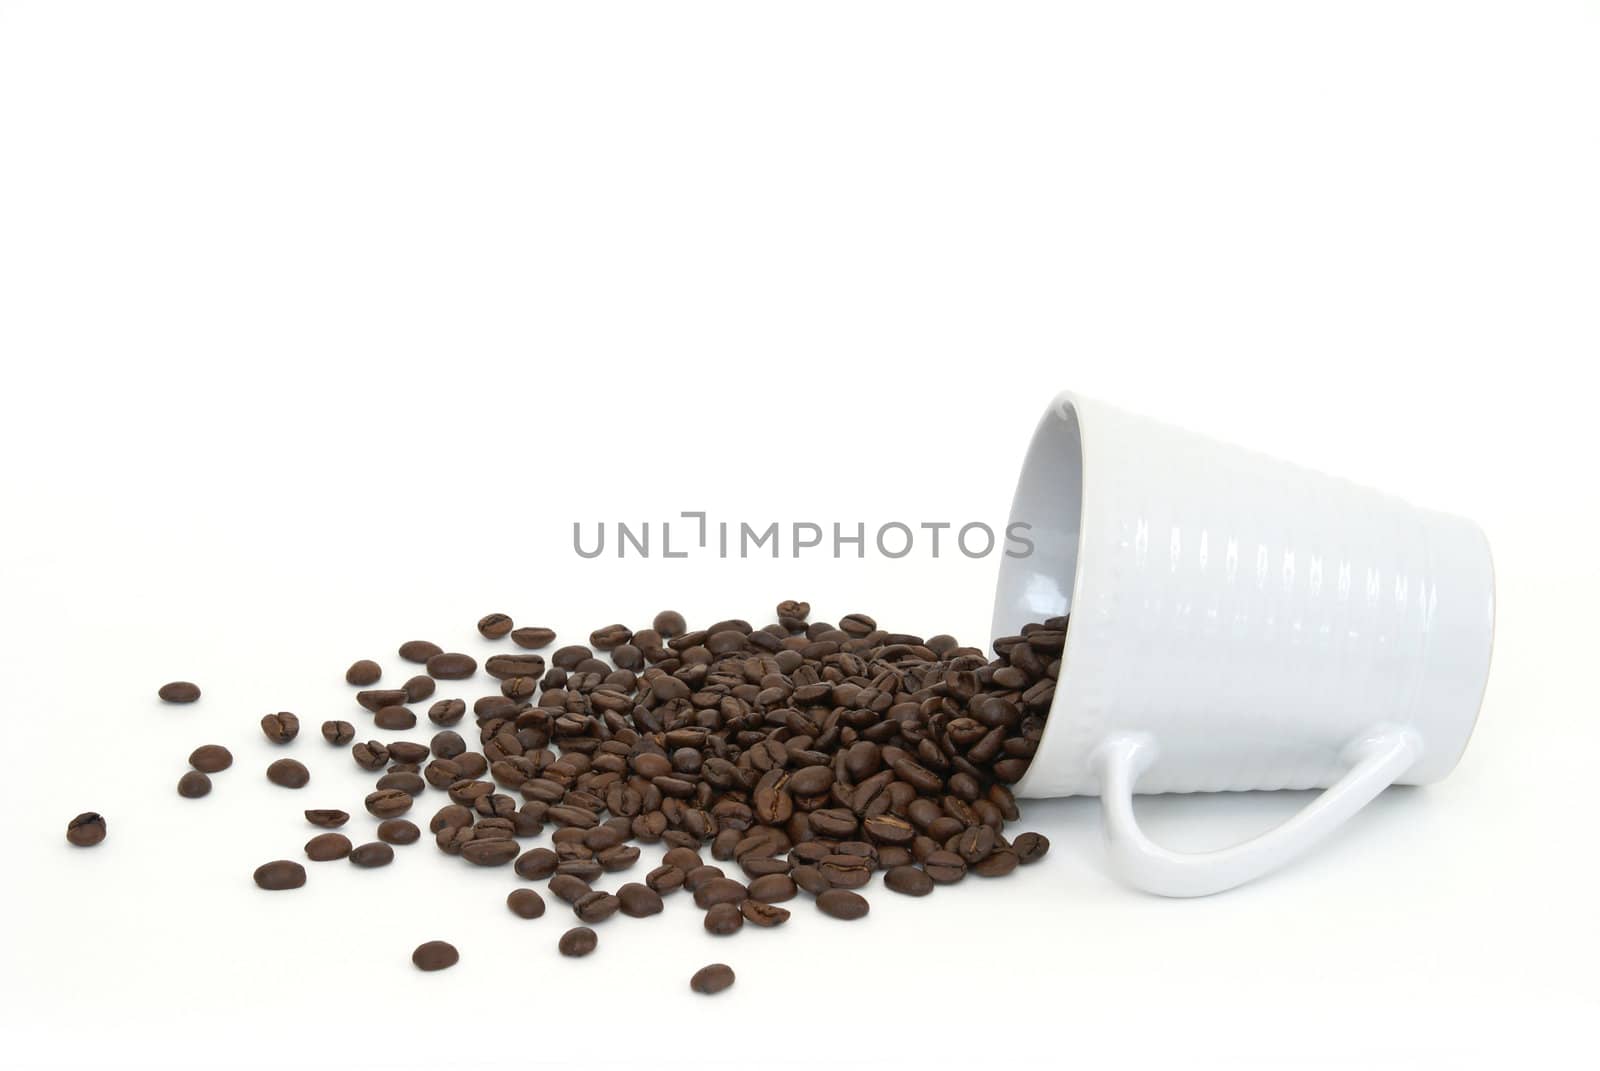 A cup of coffee beans has spilled onto a white background.